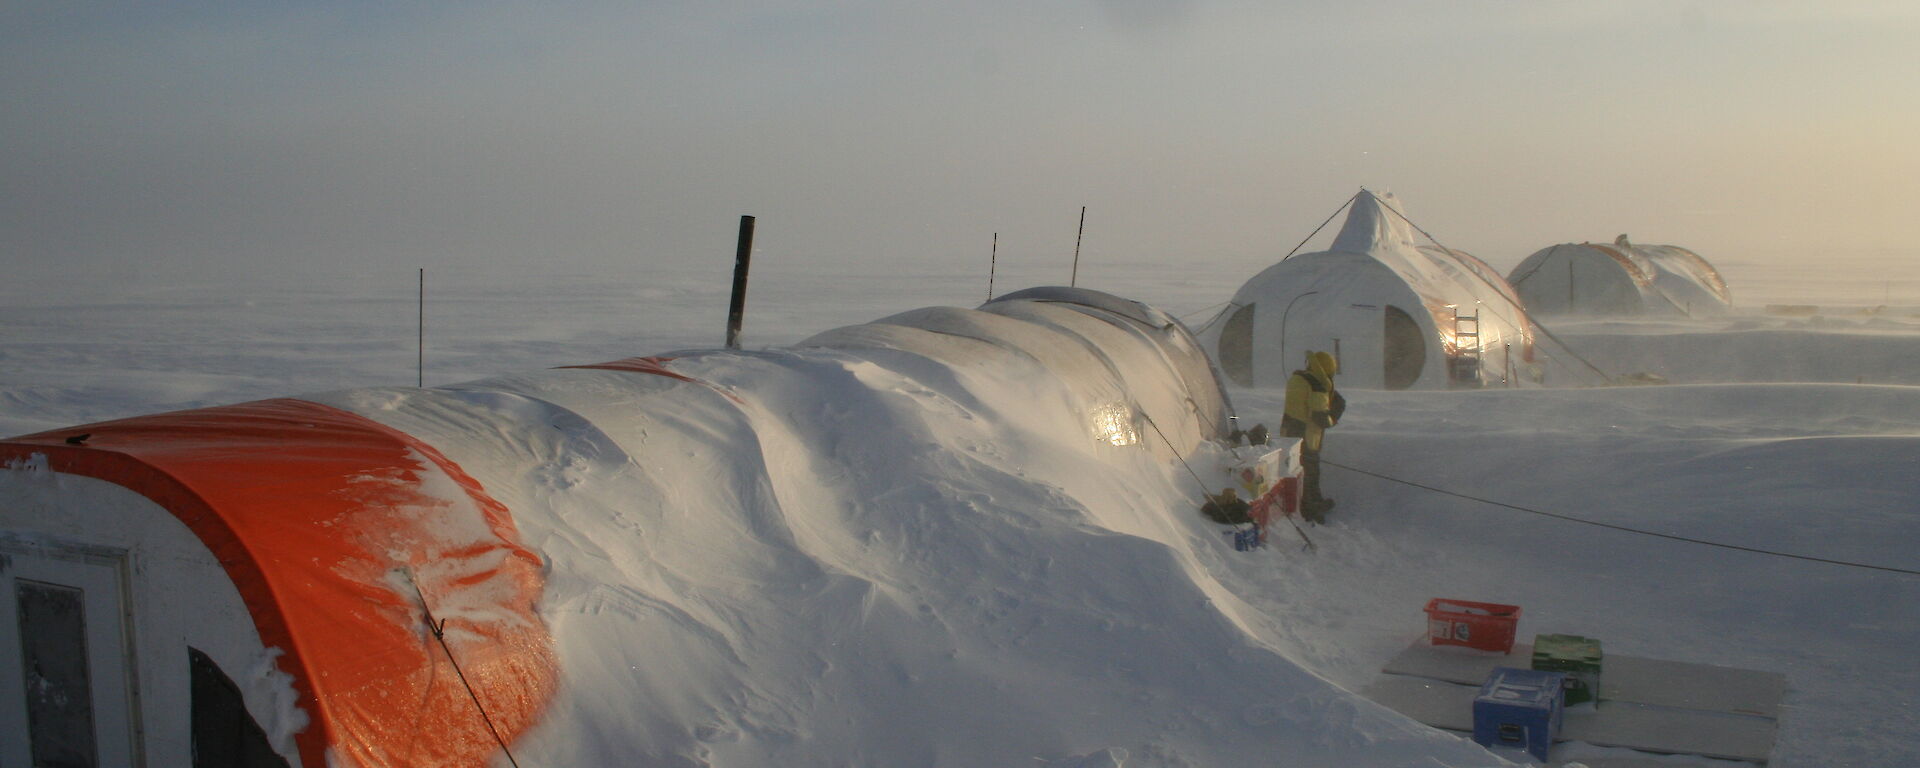 Cylindrical drilling tents covered in snow drift in Antarctica.